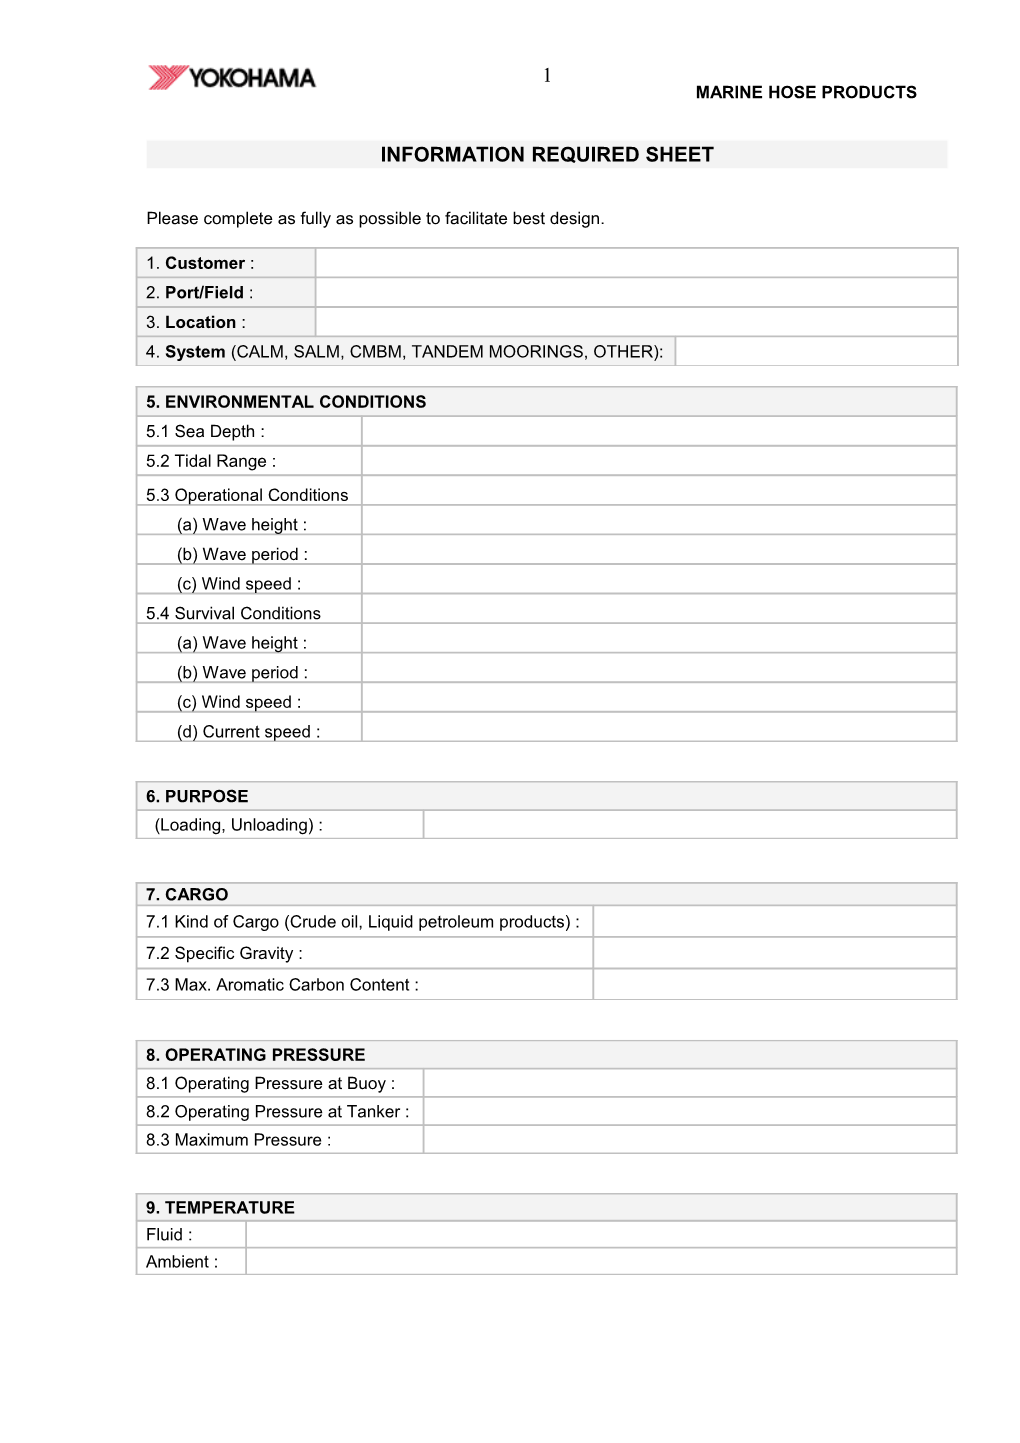 Information Required Sheet